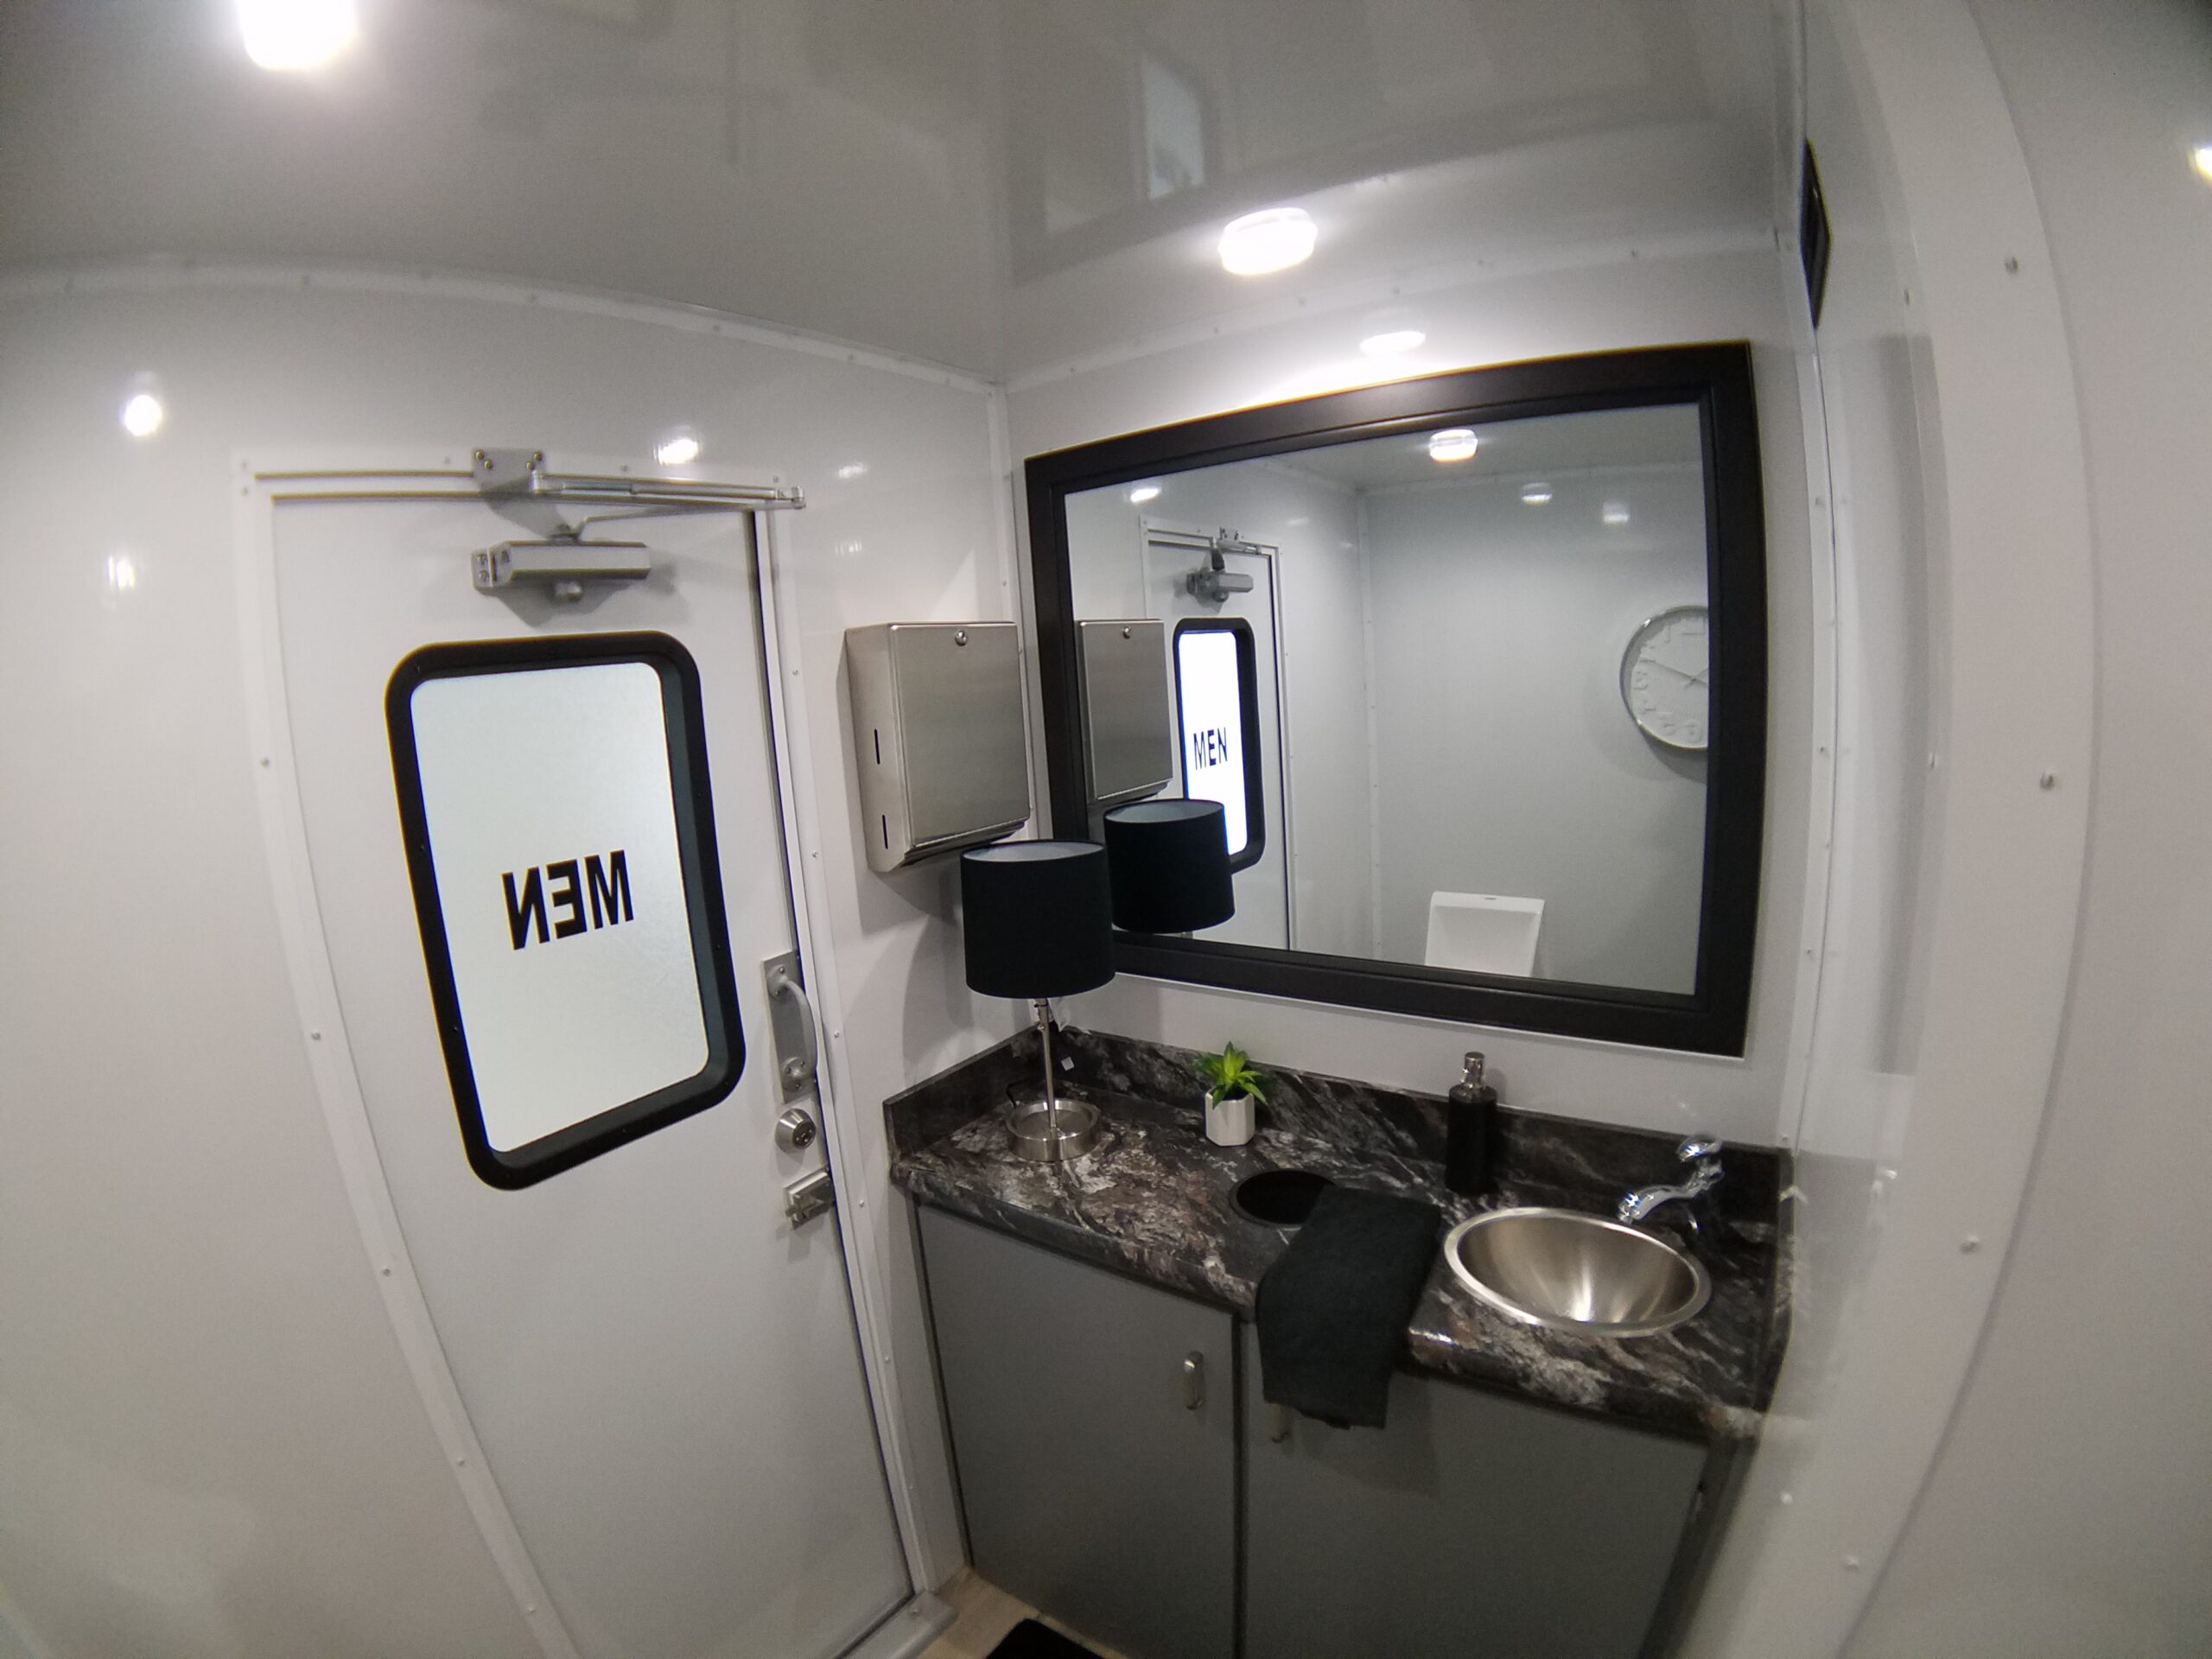 A bathroom with a sink, mirror and toilet.